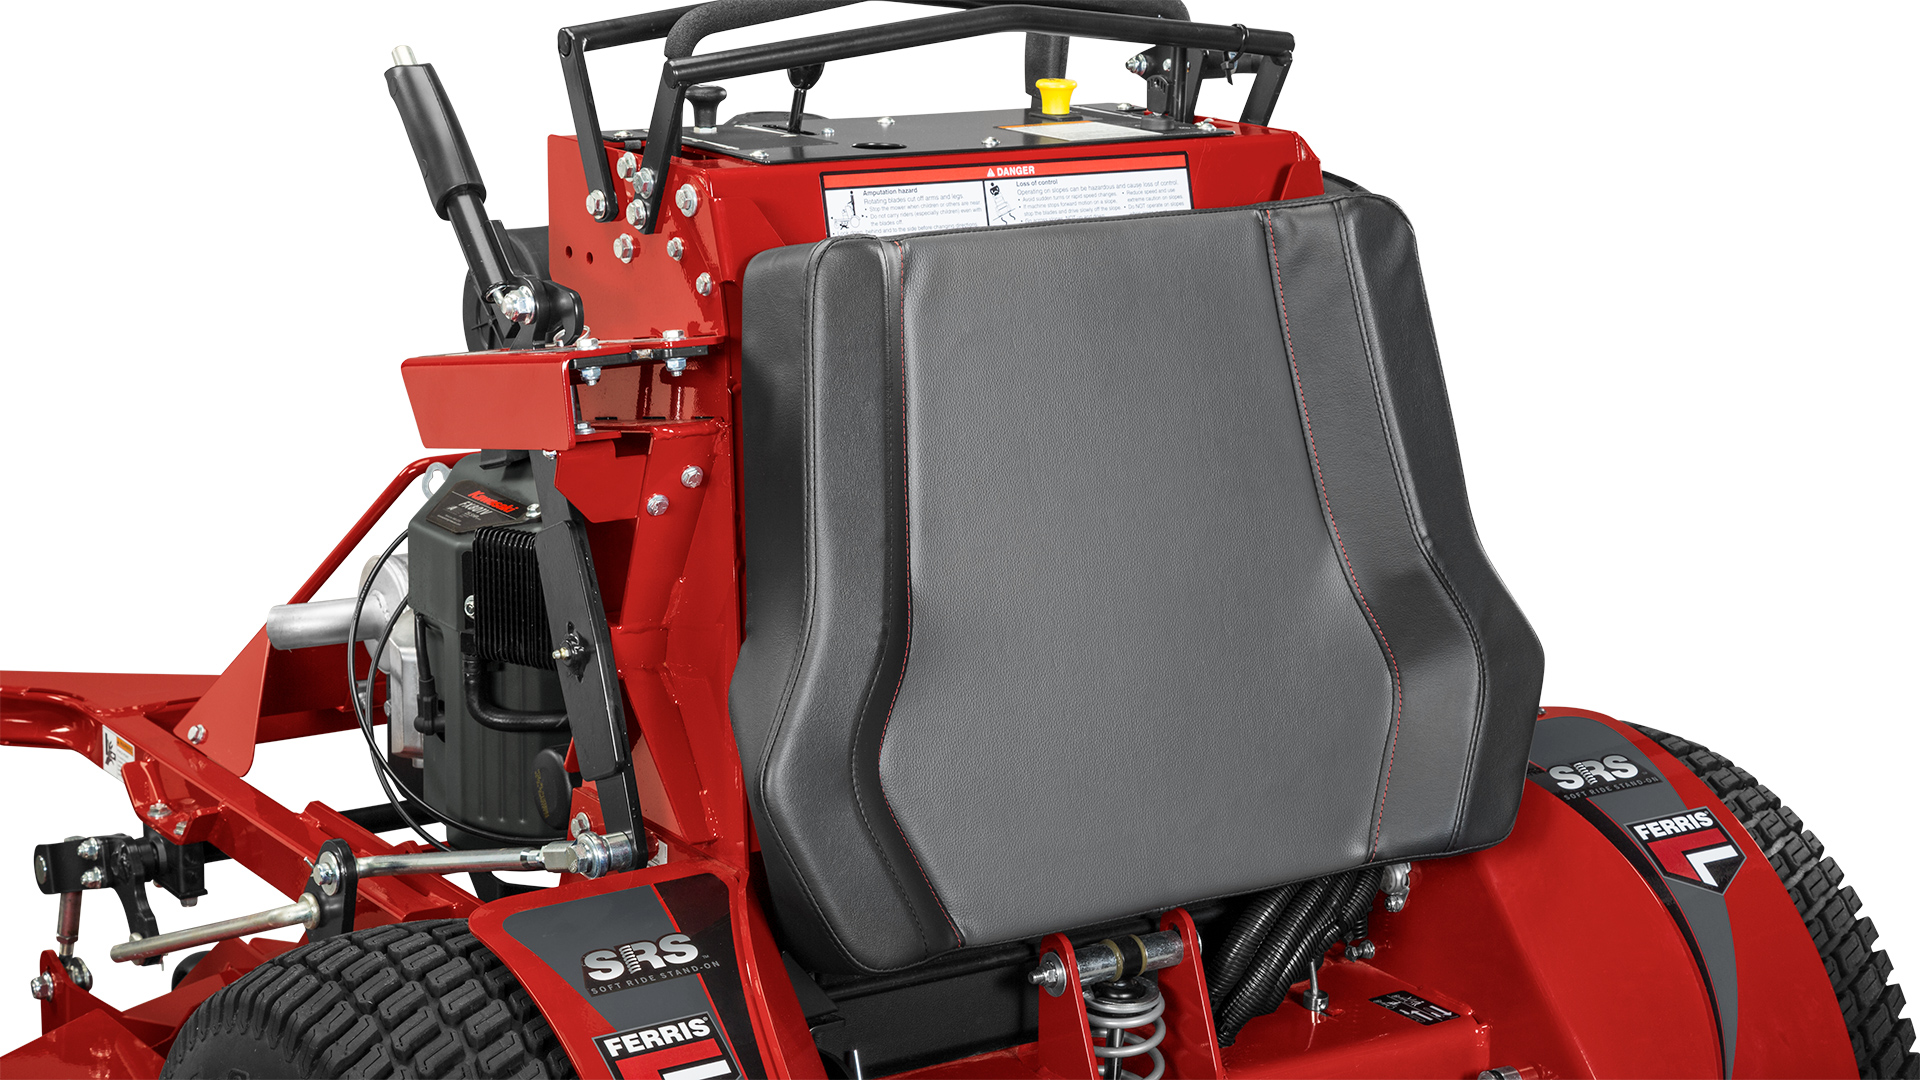 Ferris SRS™ Z2 Soft Ride Stand-On Mowers - Standing Comfort